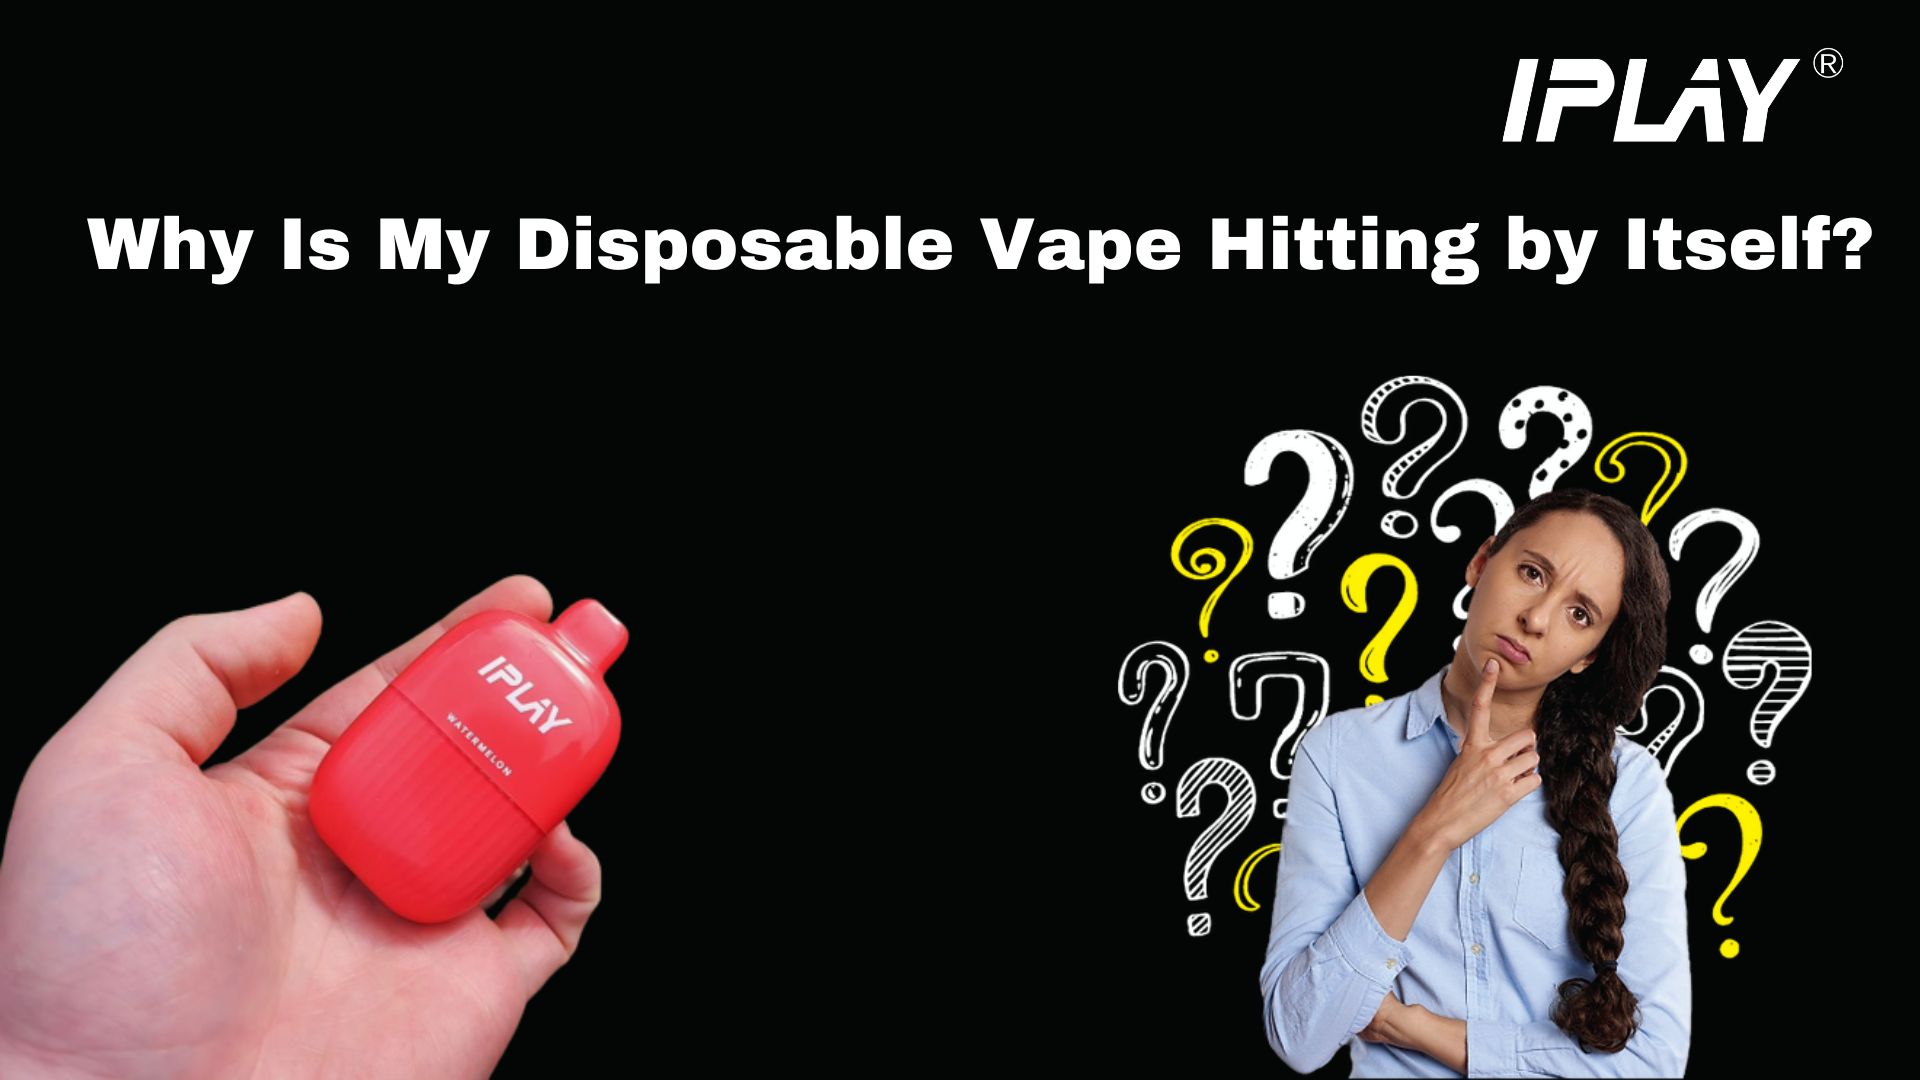 Why Is My Disposable Vape Hitting by Itself?